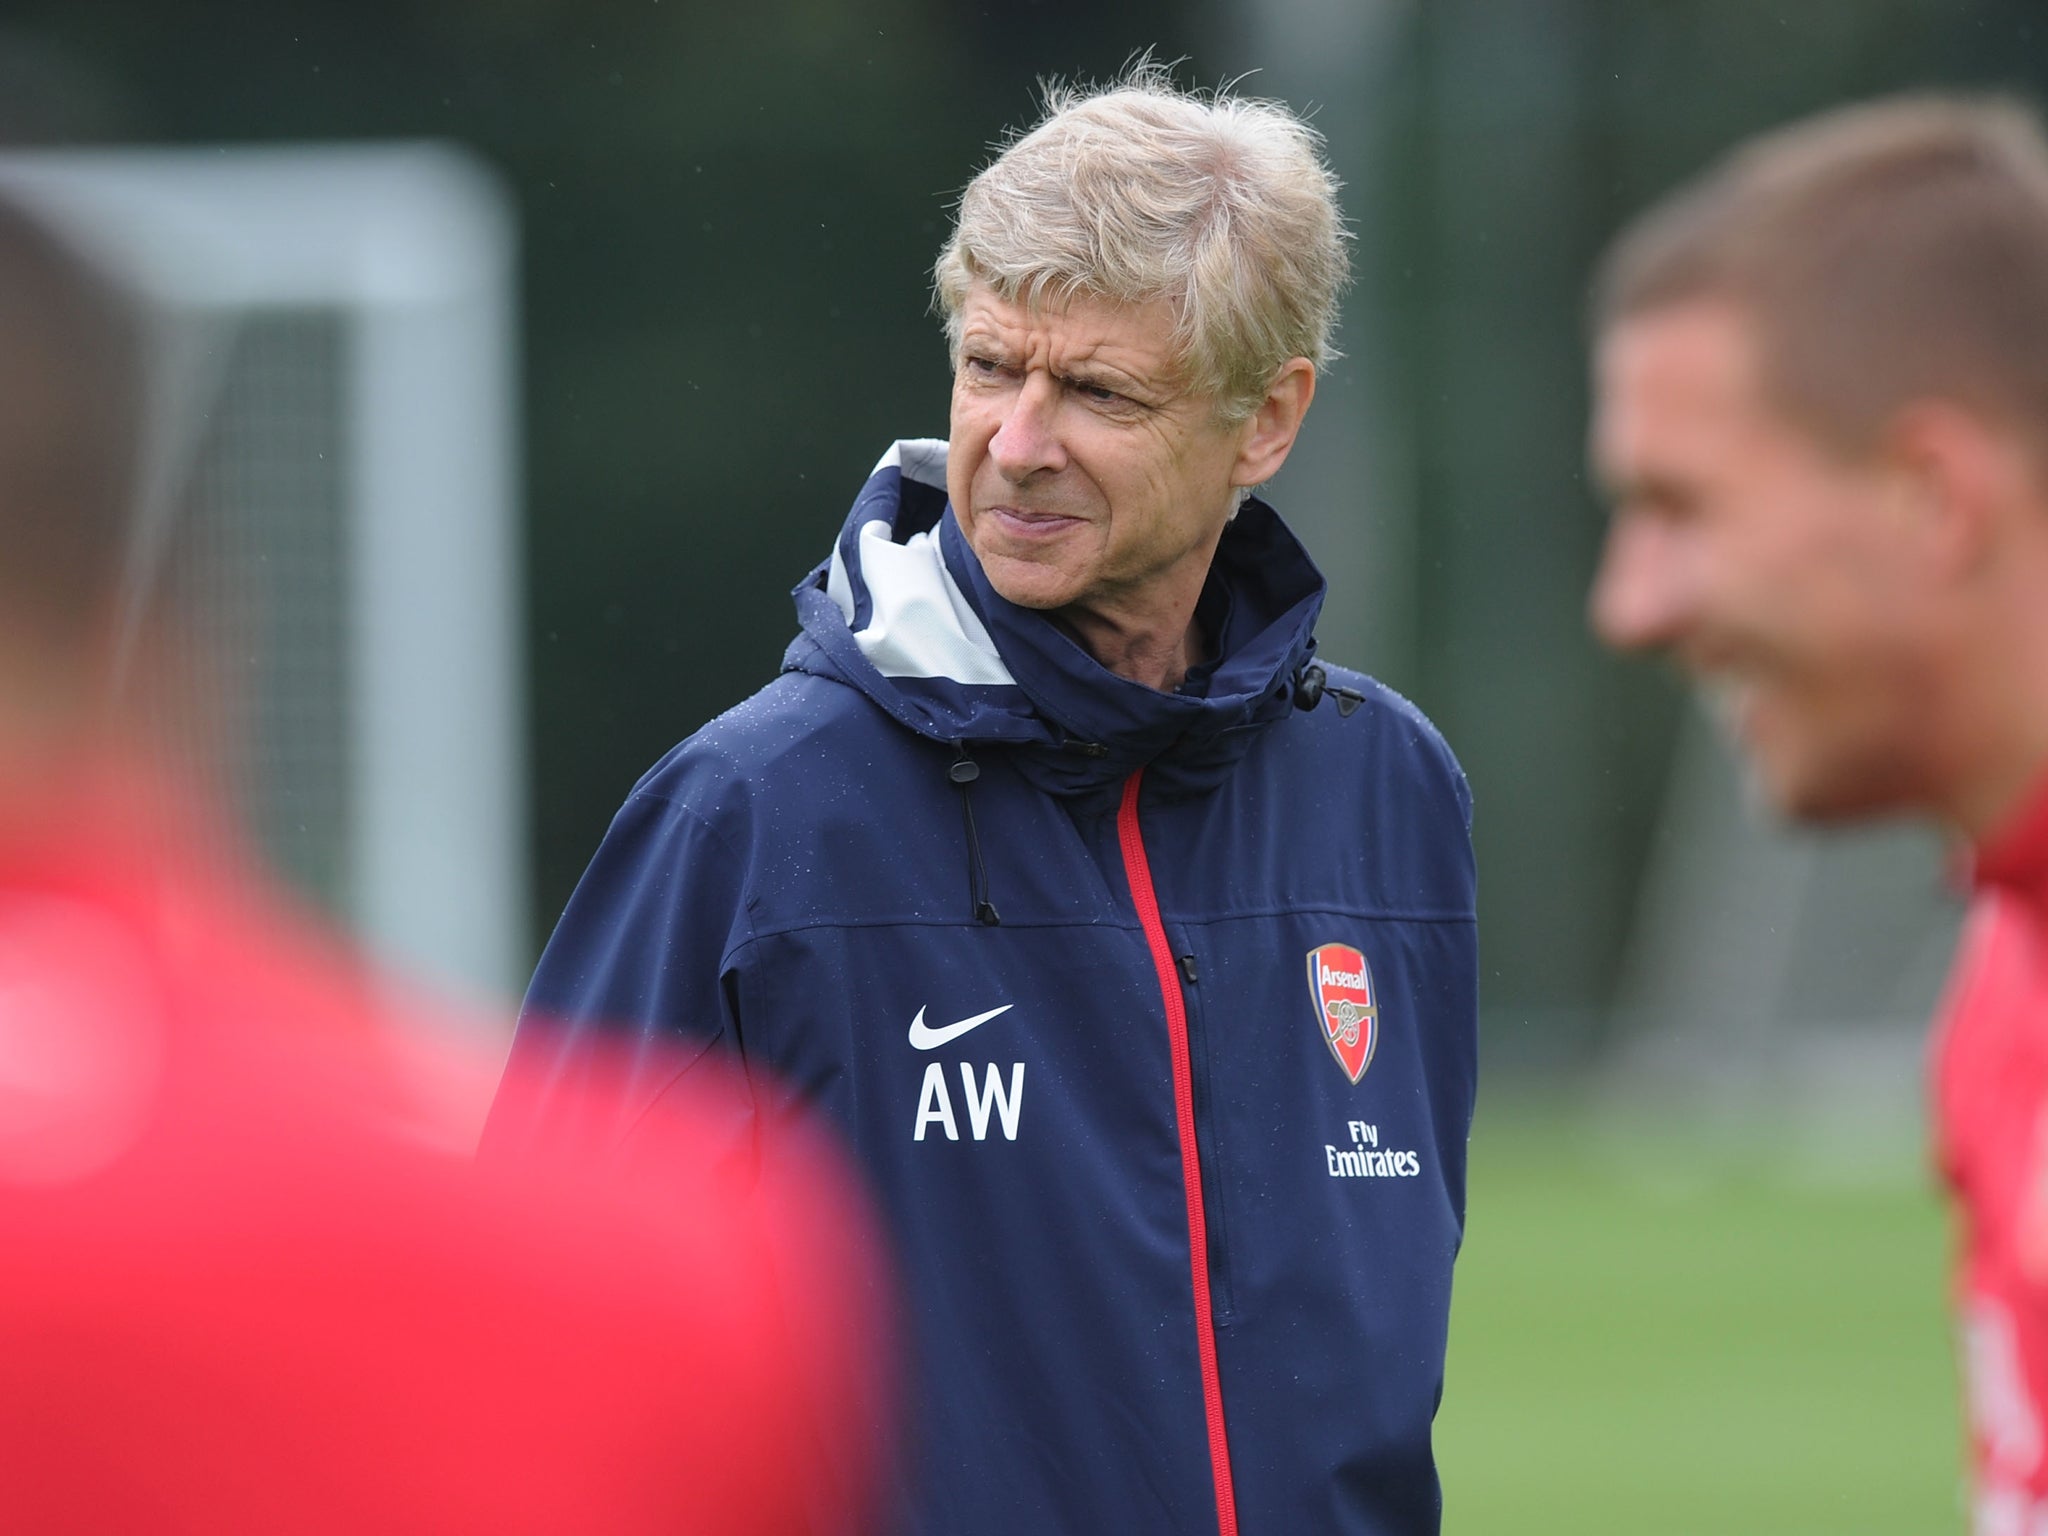 Arsene Wenger has attempted to calm frustrations over Arsenal's lack of transfers this summer